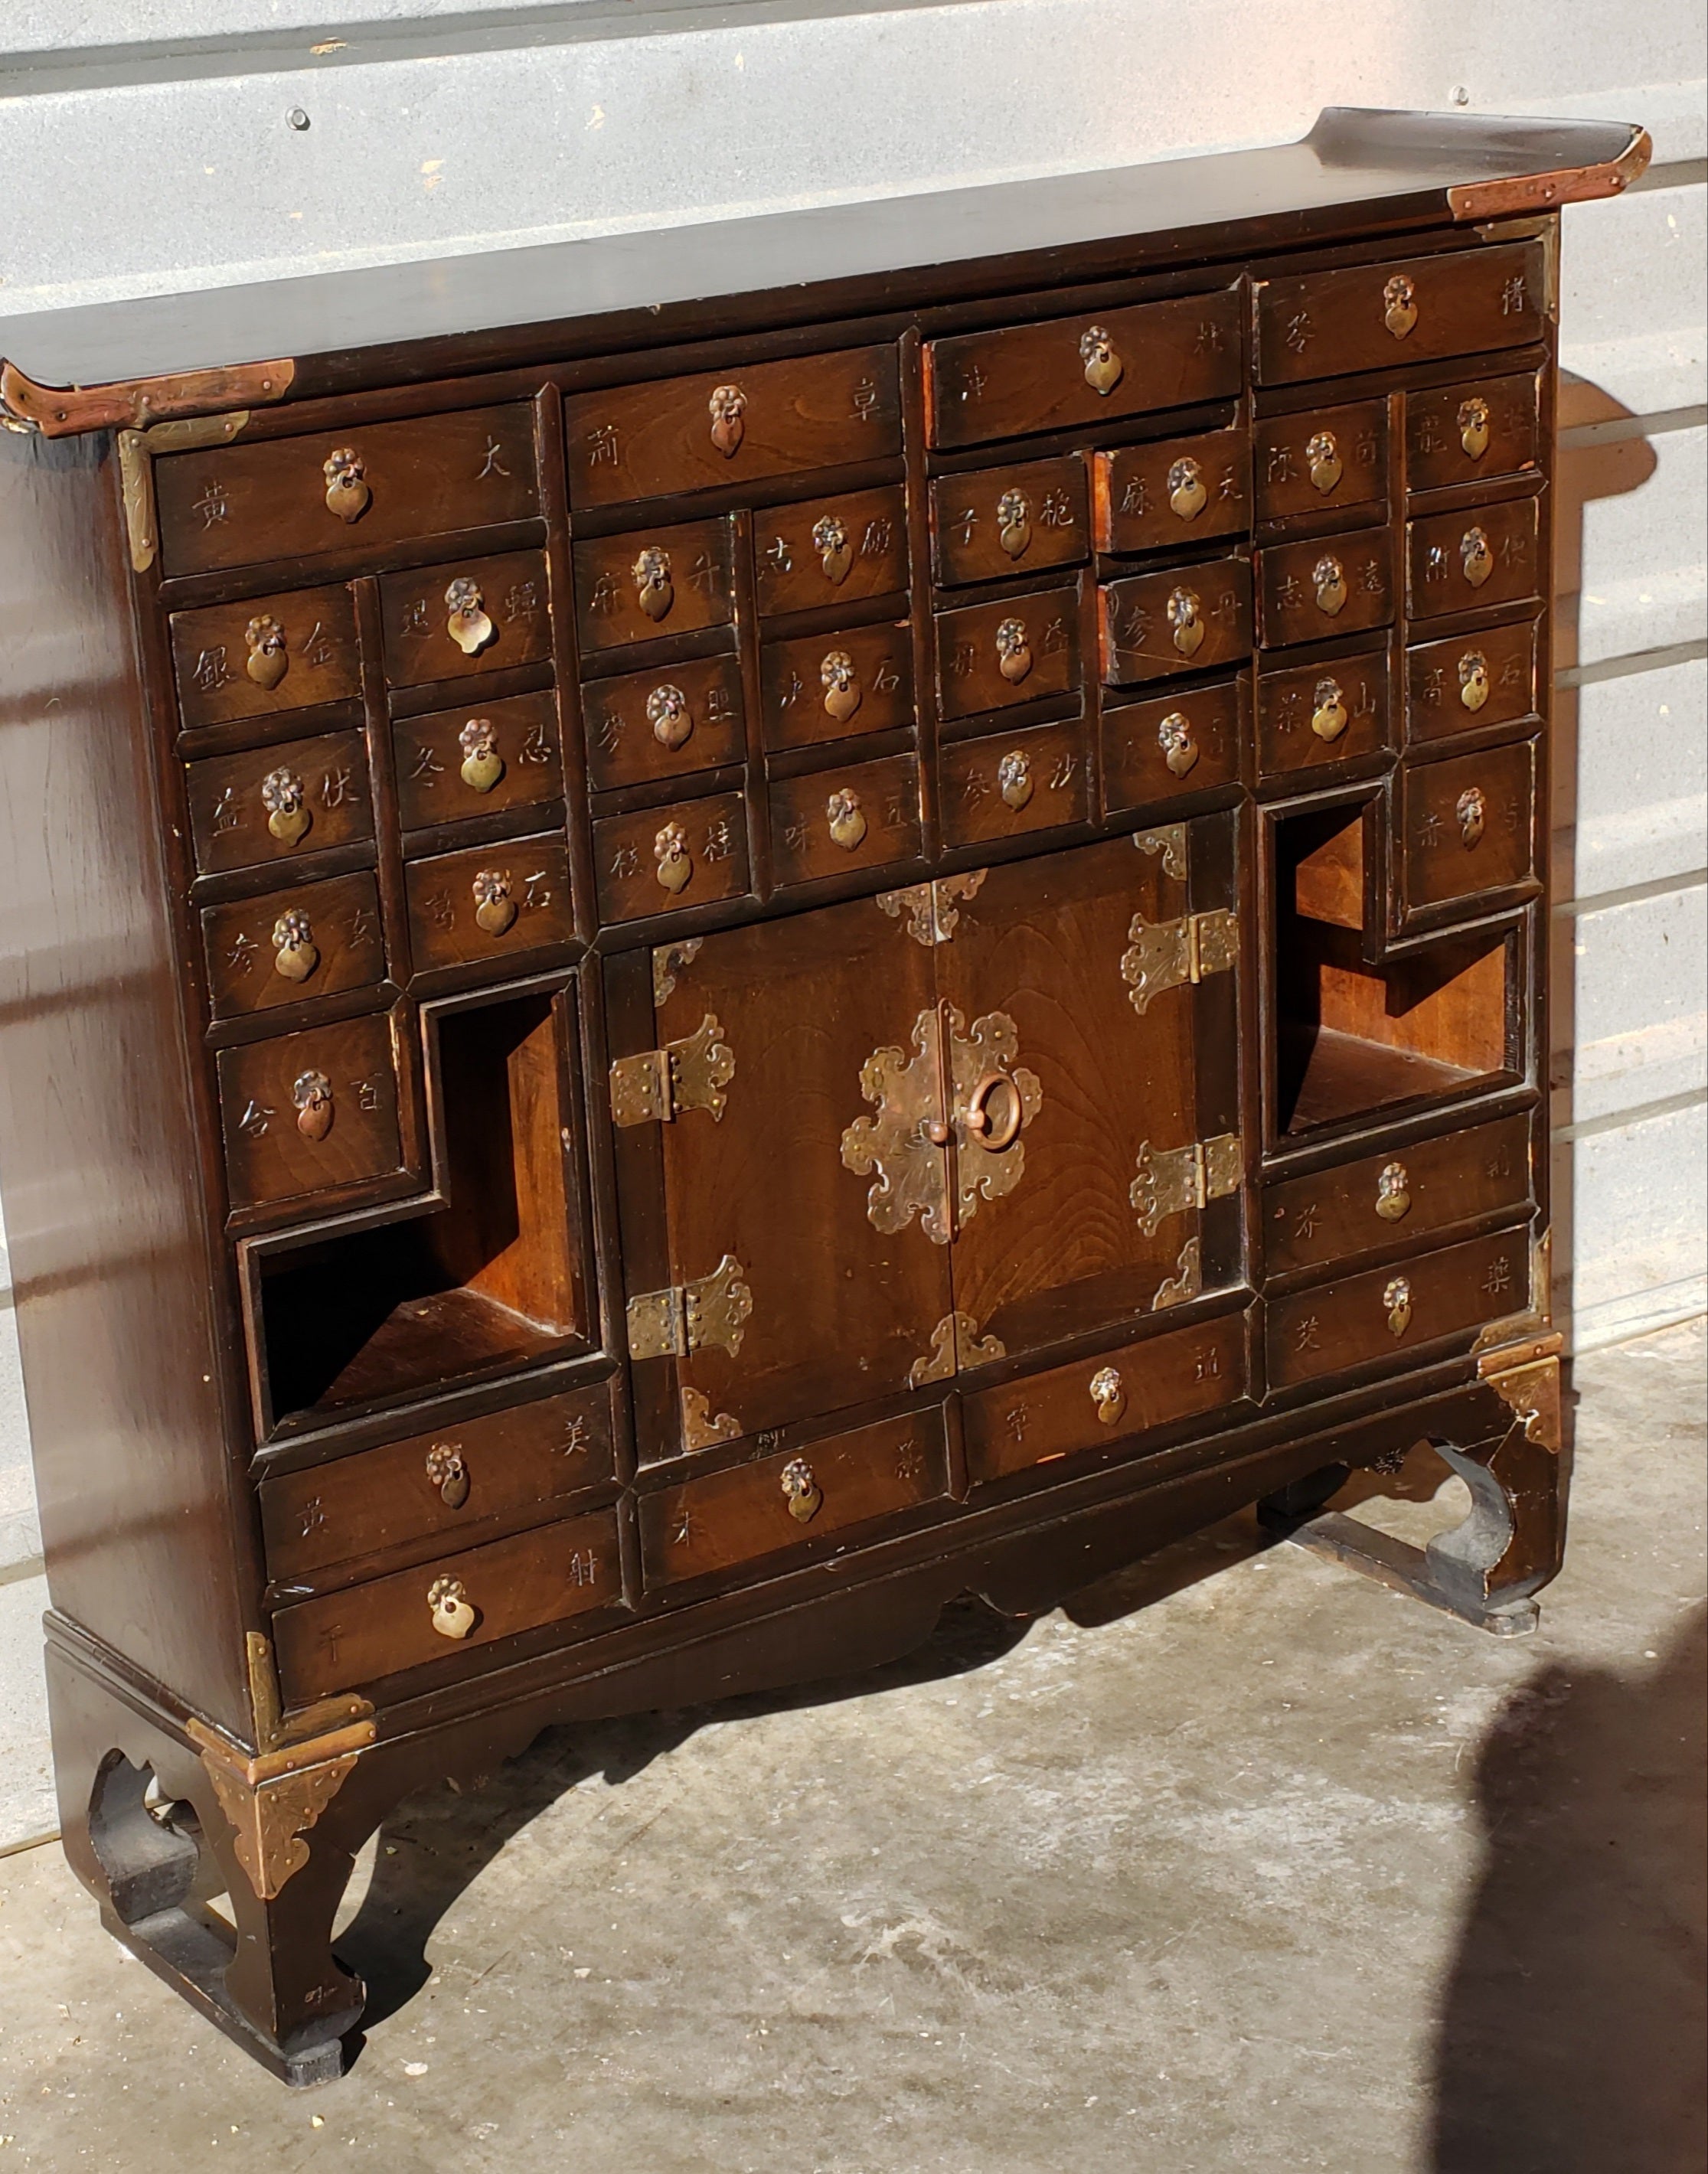 Anglo-Japanese Antique East Asian 36 Drawers Apothecary Cabinet Chest, circa 1920s